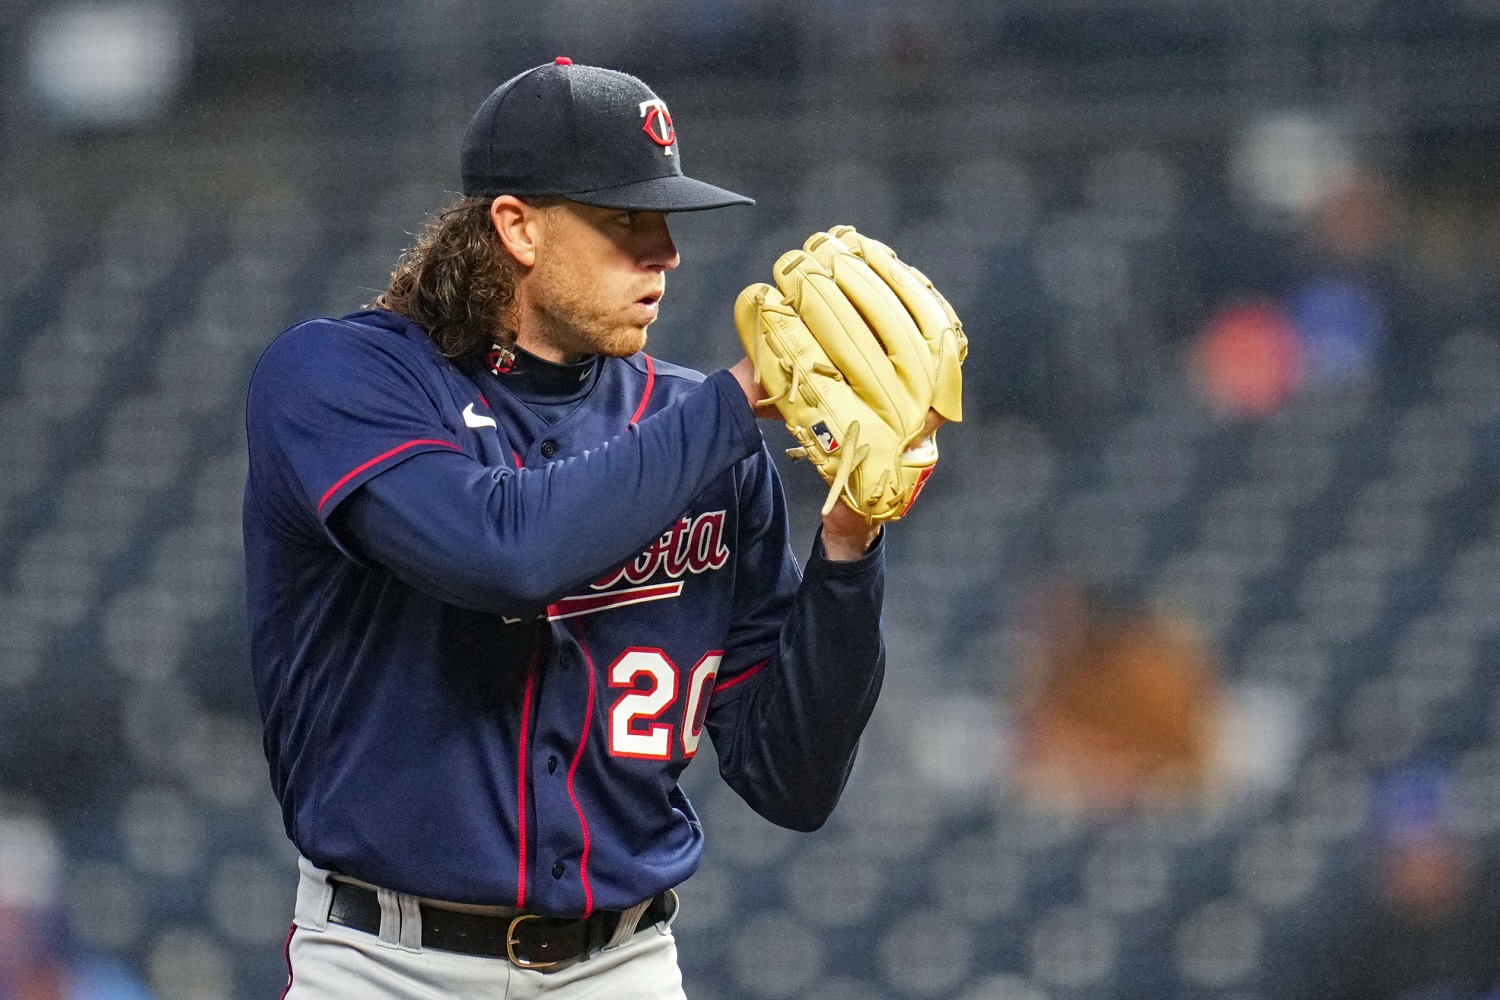 Chris Paddack reacts to contract extension with Twins